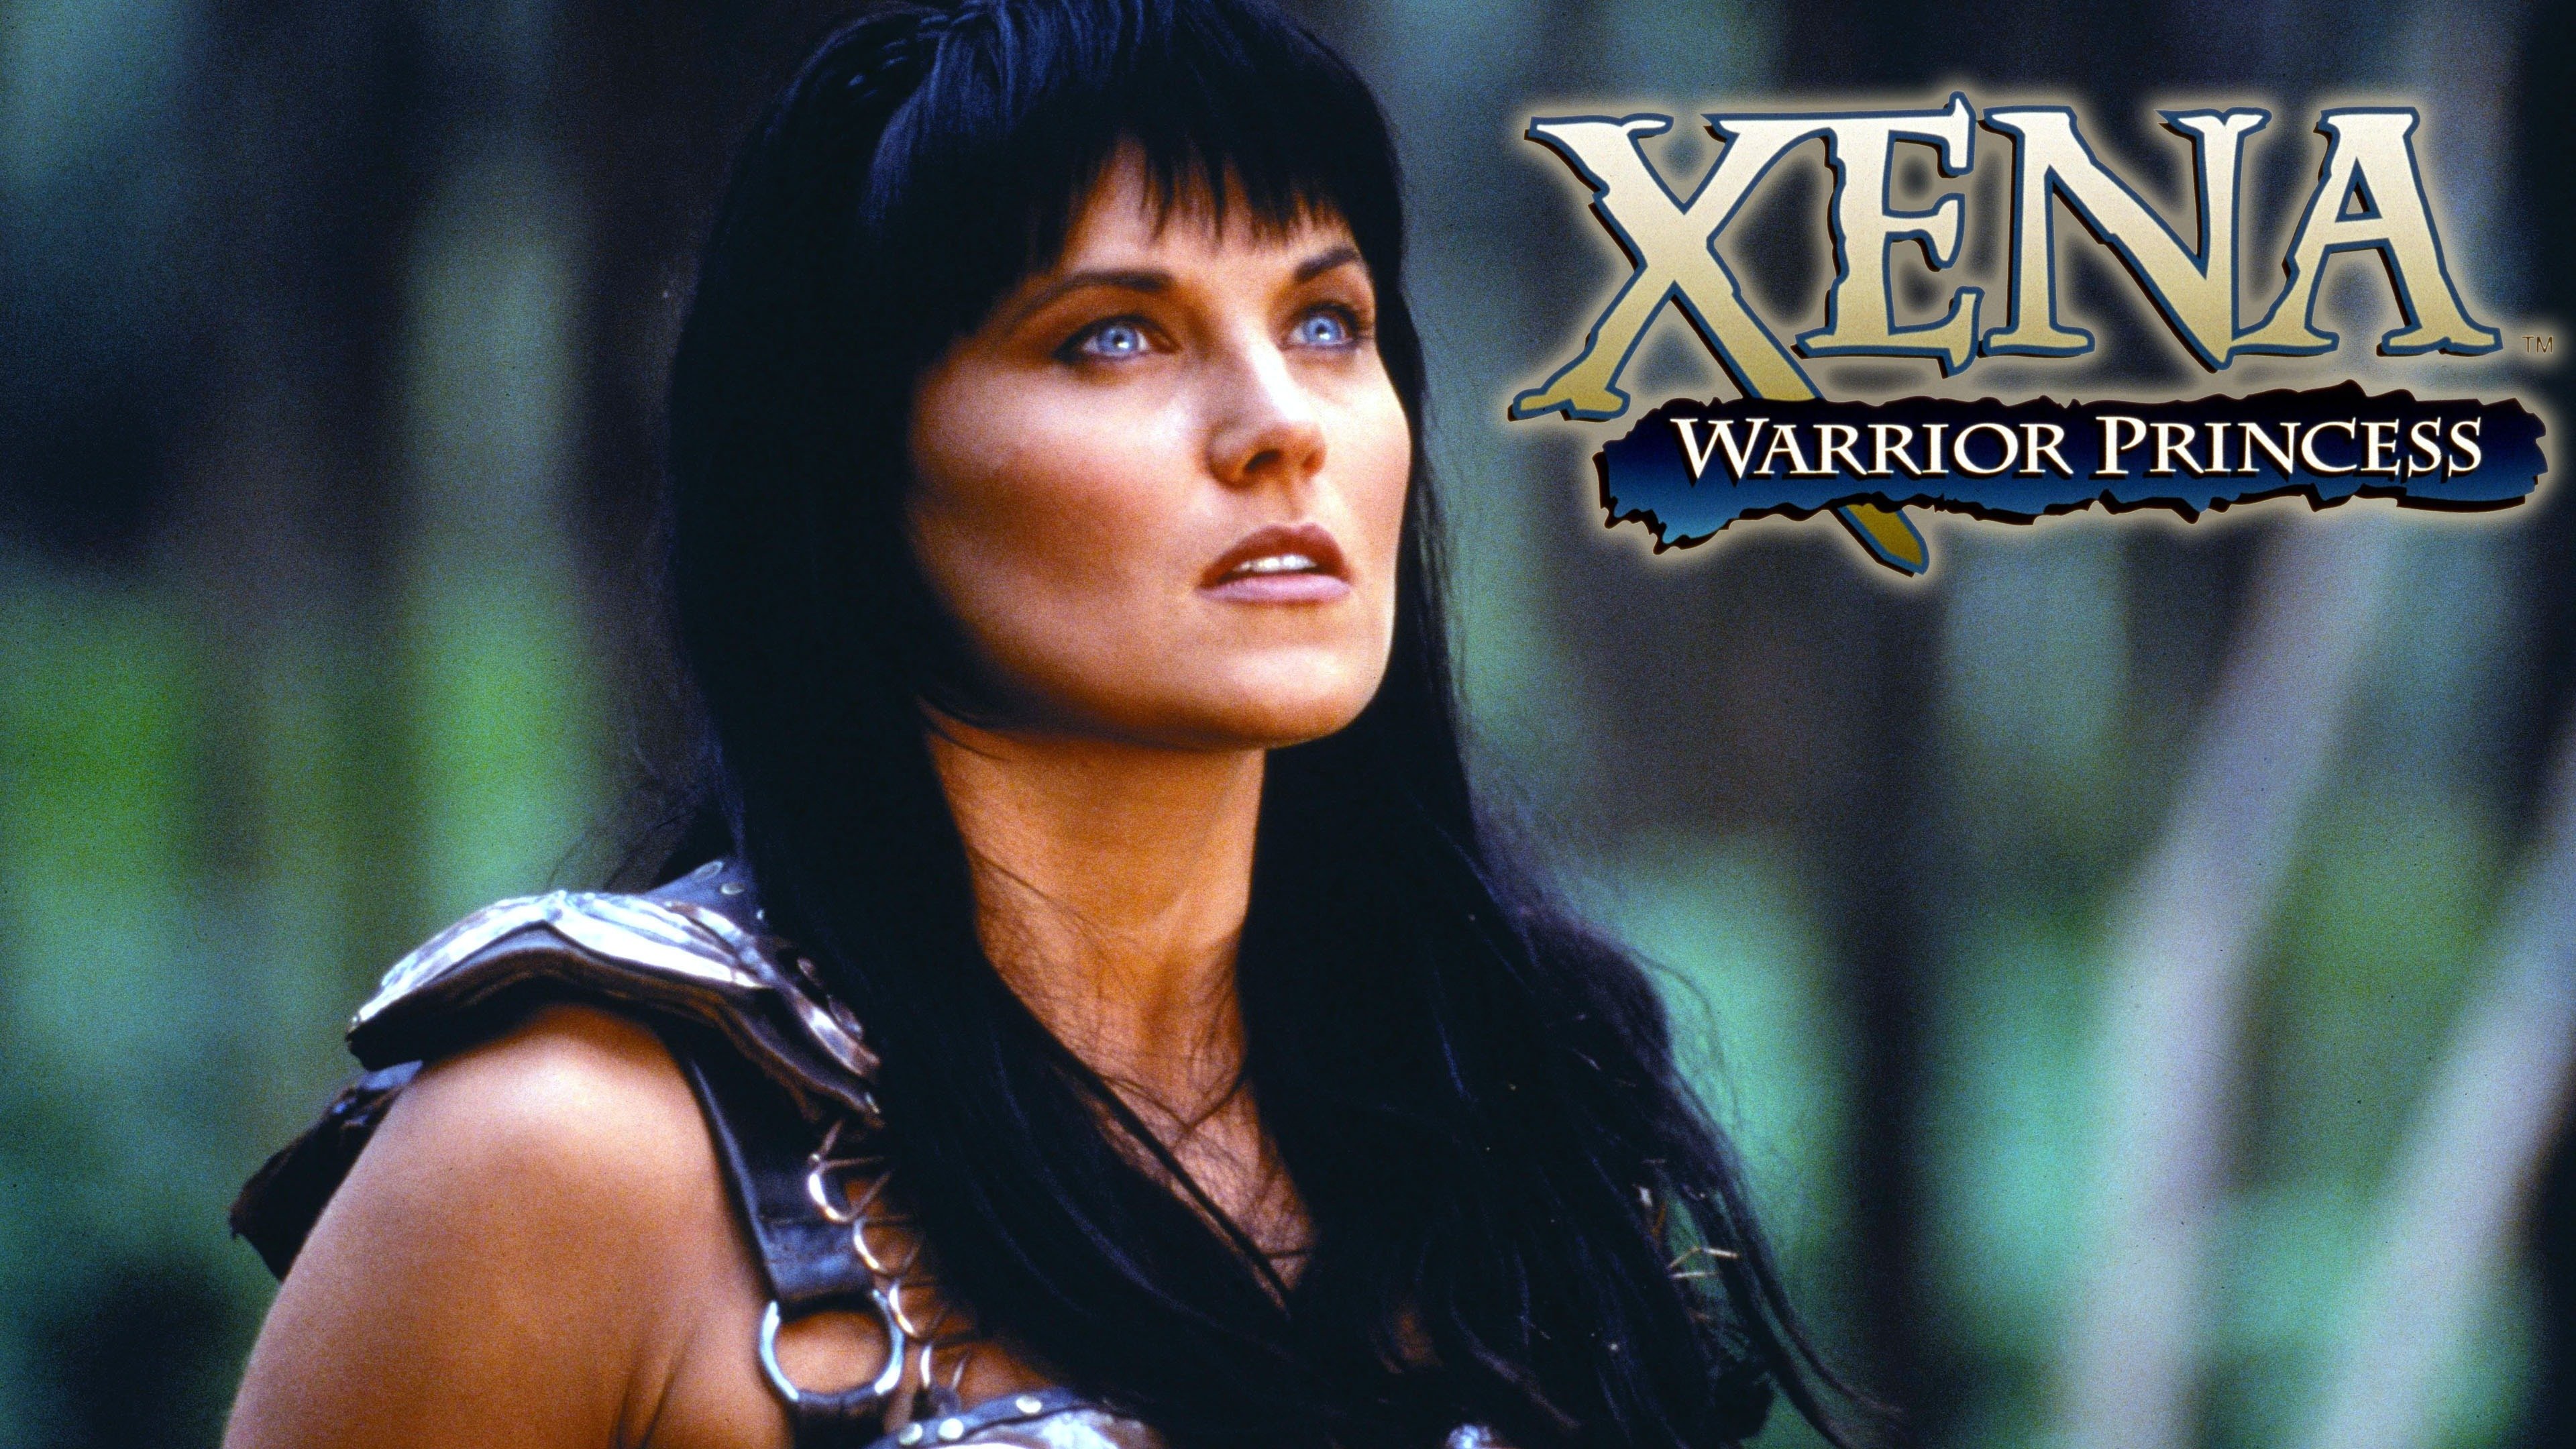 2003 XENA WARRIOR PRINCESS "QUOTABLE" DEALER SELL SHEET 2 SIDED 